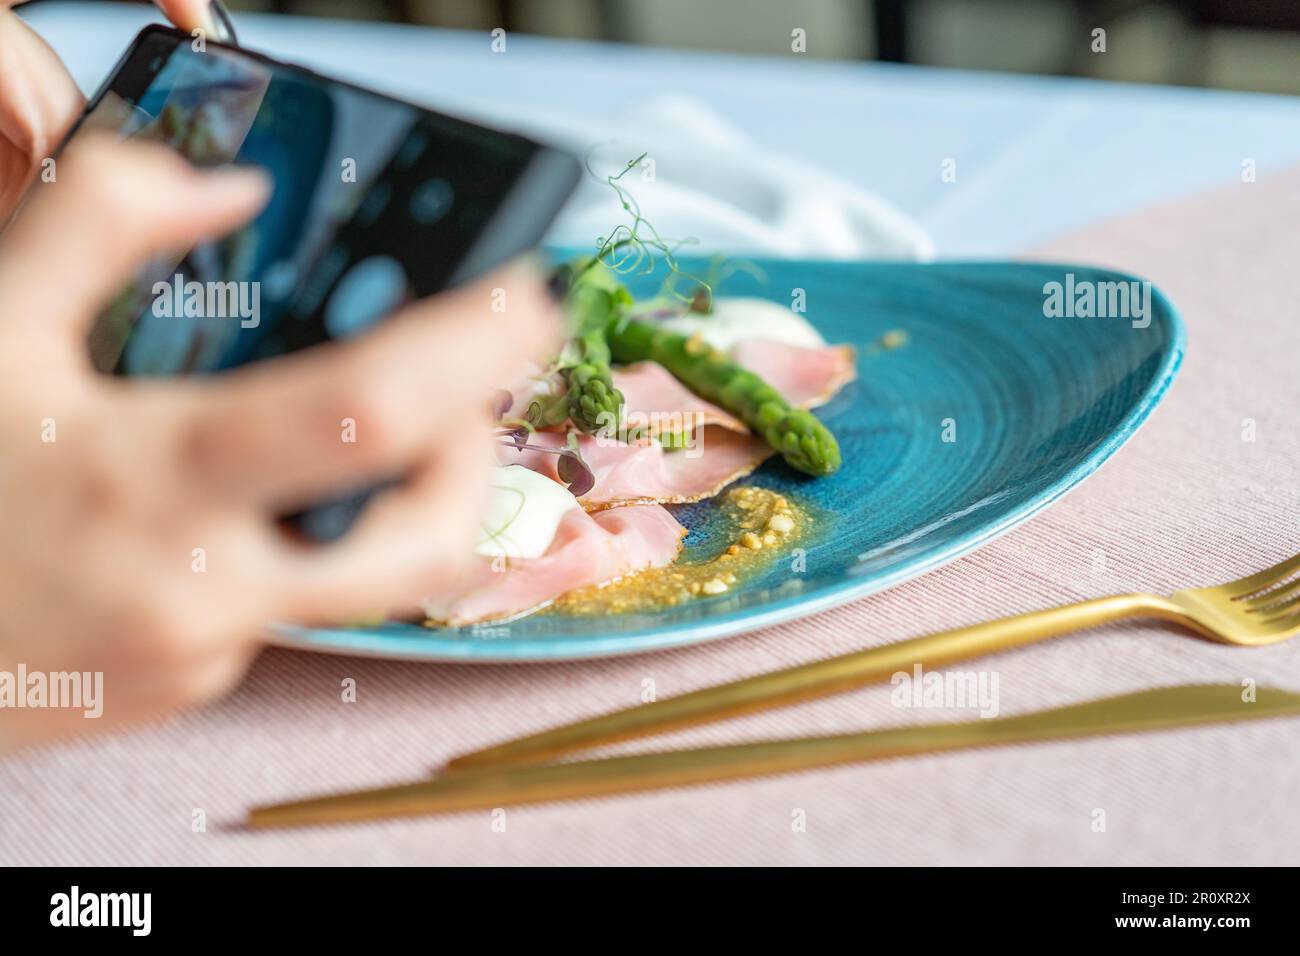 Appetizer with rosemary ham,asparagus,peanuts,and taleggio on the blue plate. A woman taking a photo of the food with a mobile phone. Stock Photo